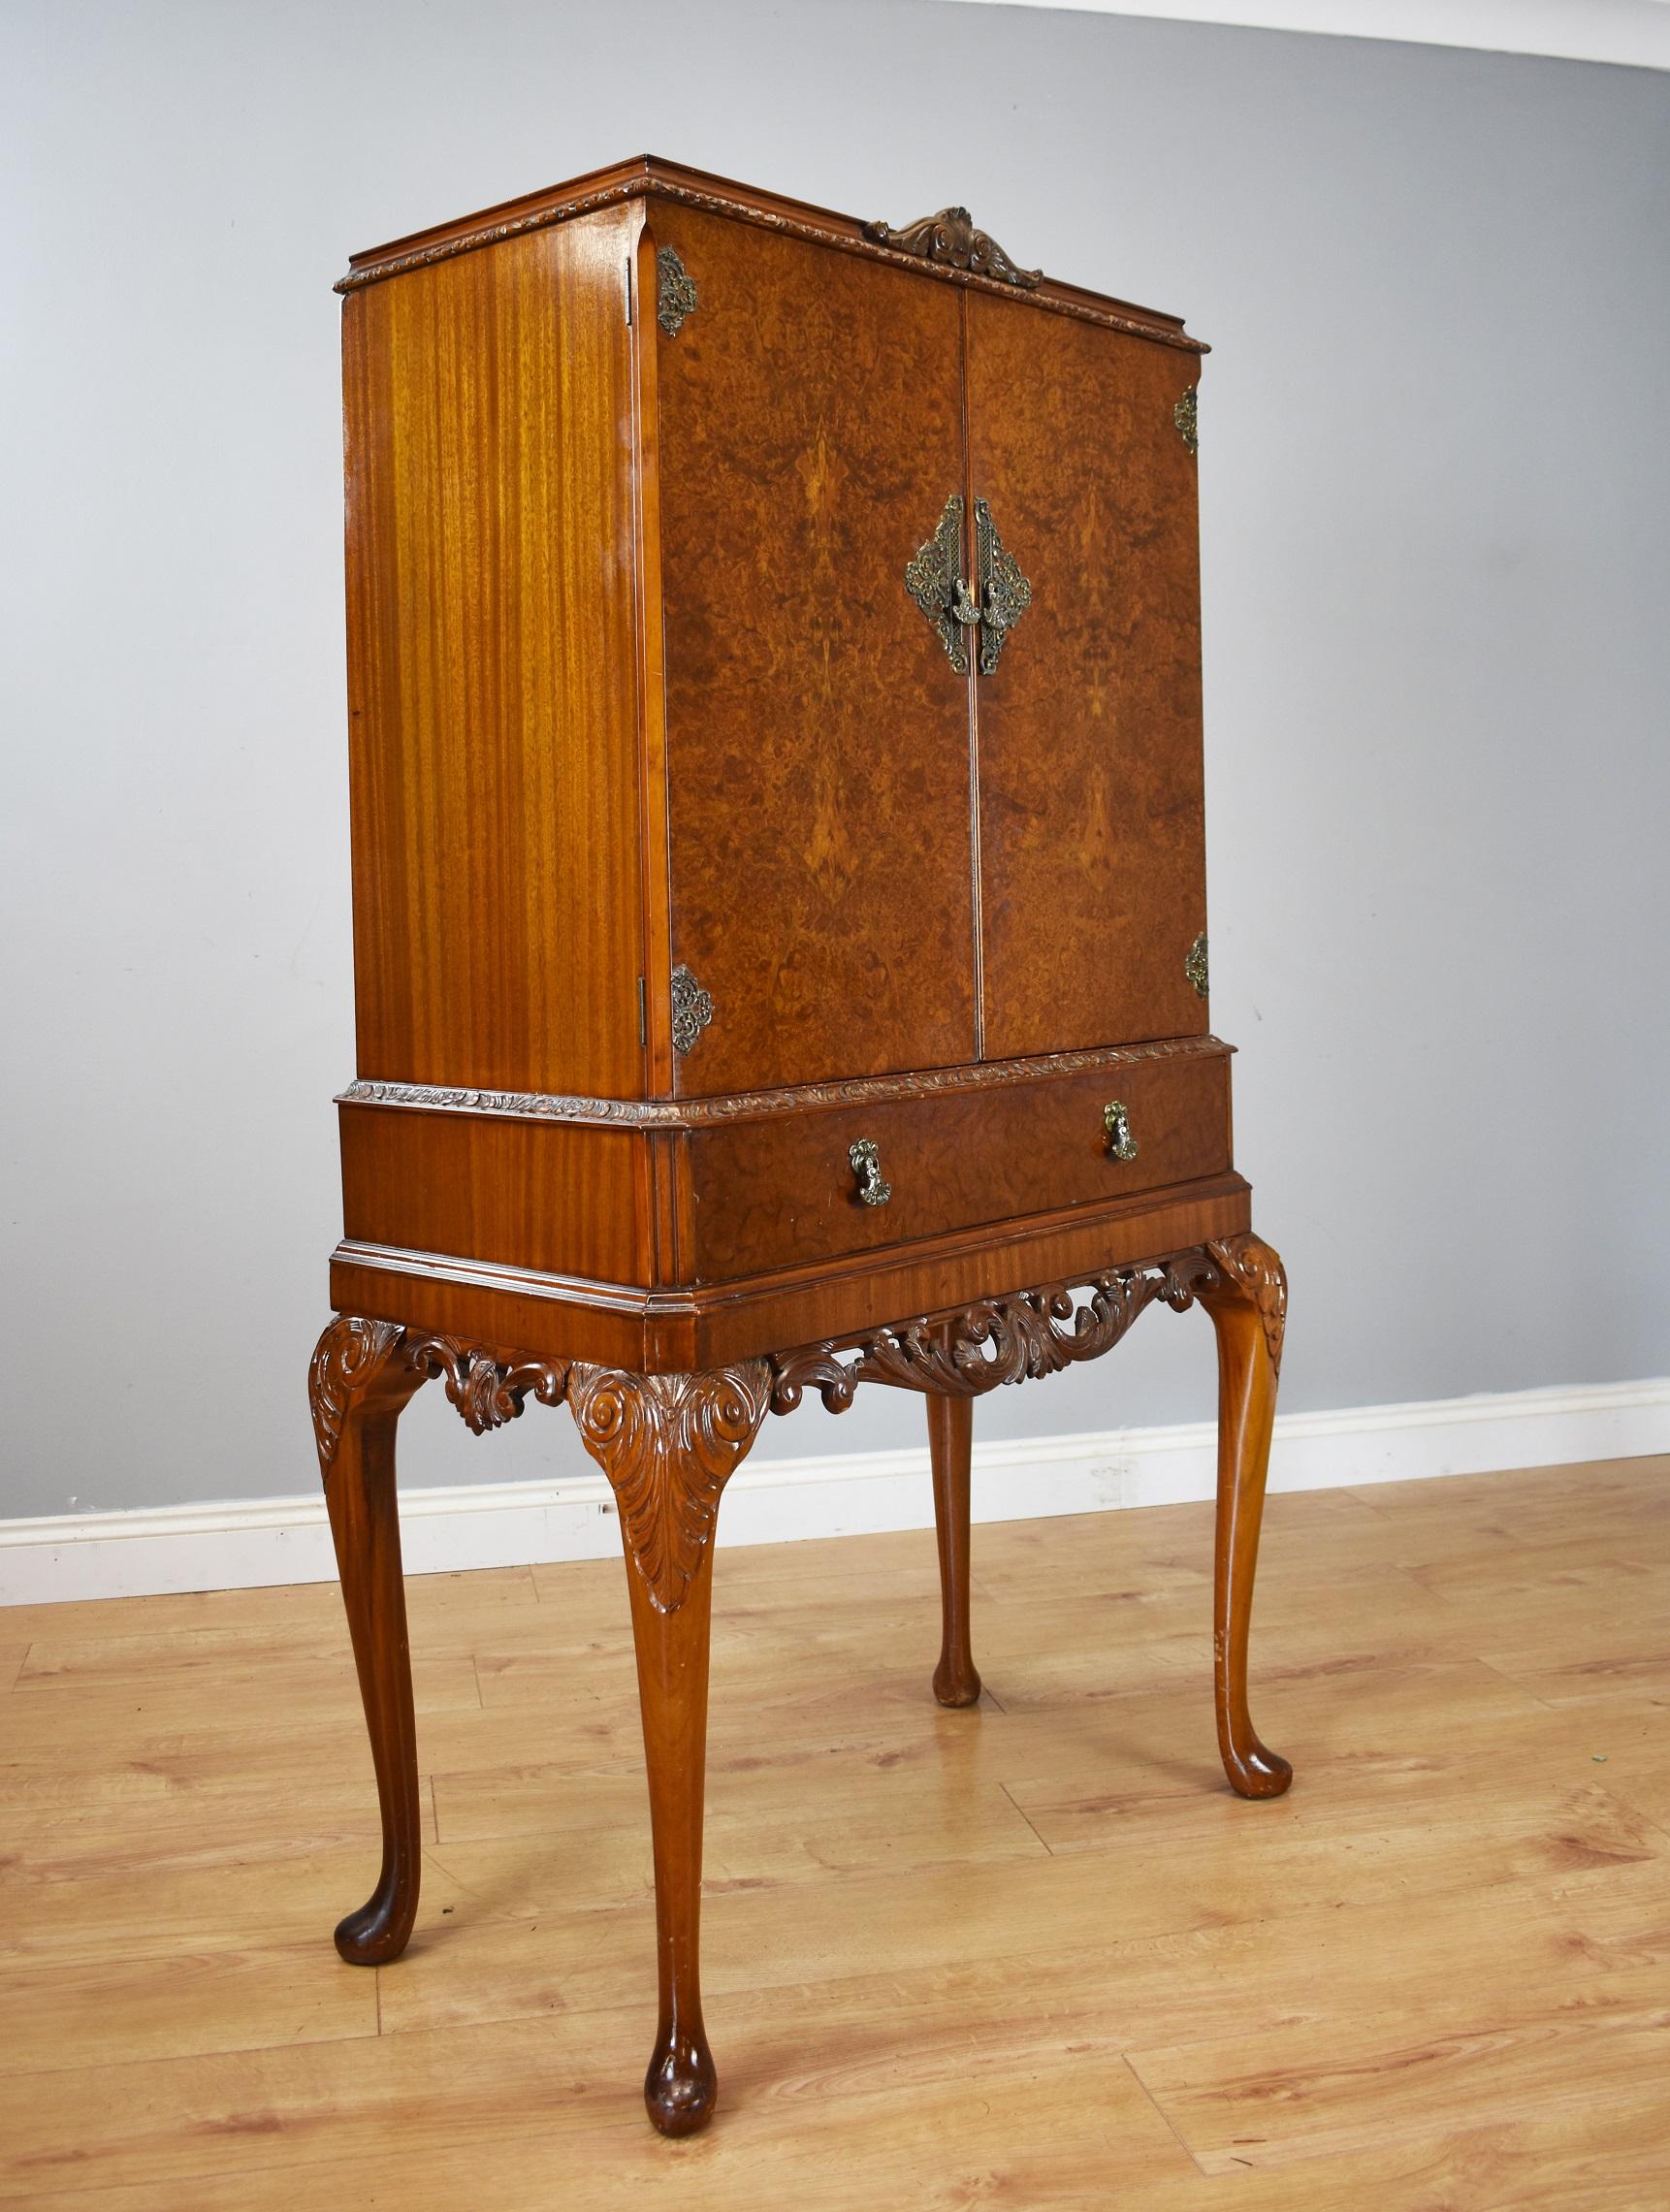 For sale is a good quality 20th century Queen Anne style burr walnut cocktail cabinet, have a carved pediment, above two doors, veneered in beautifully figured walnut, opening to reveal a mirror backed interior, with a single glass shelf. Below this